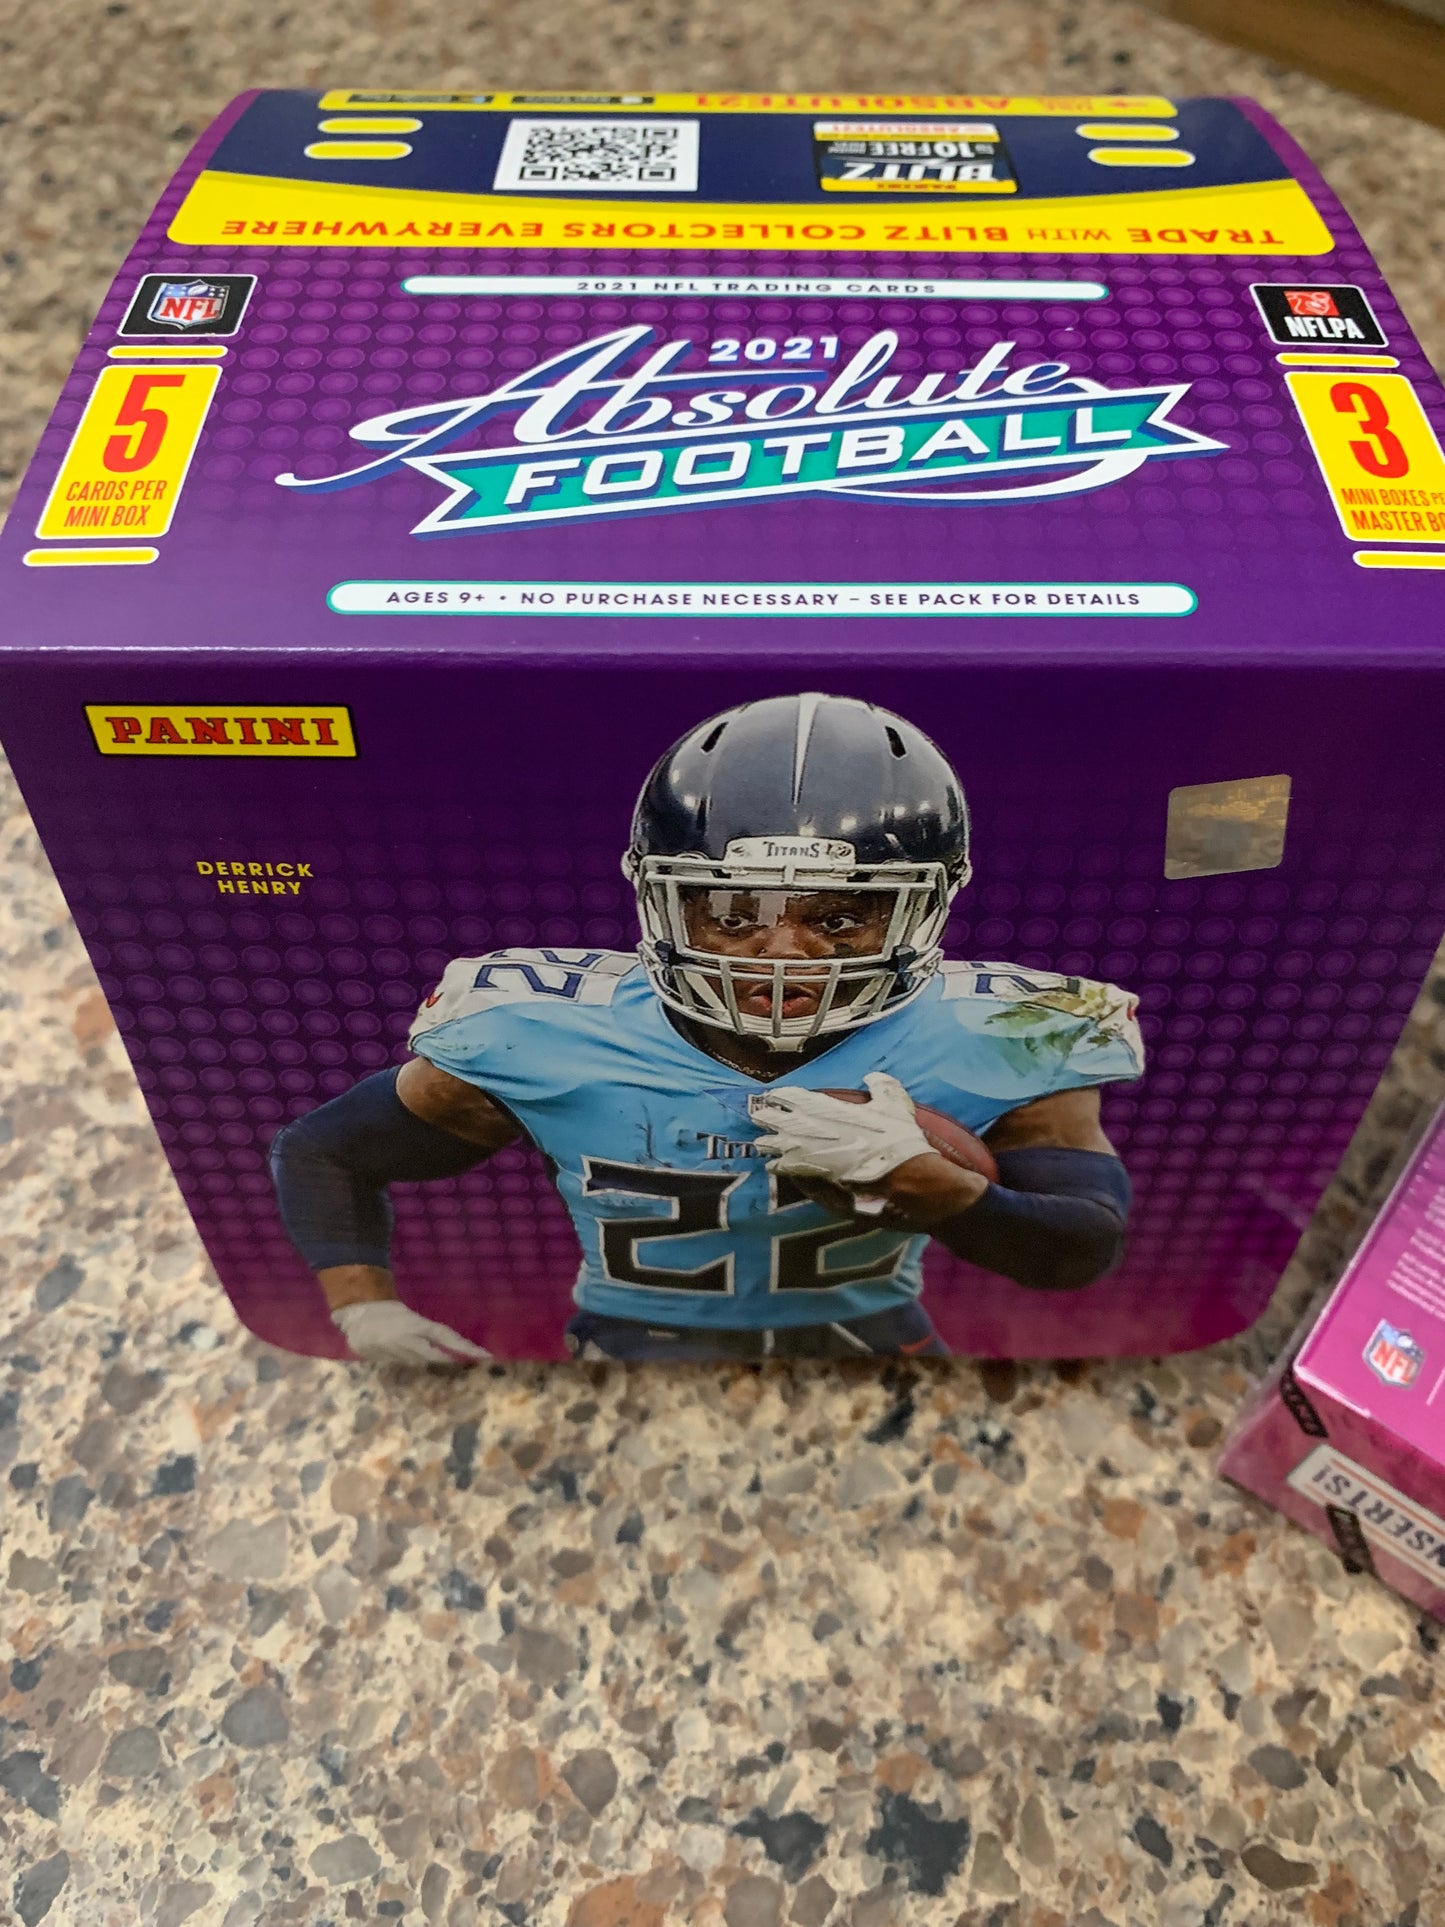 2021 Absolute Football Hobby Box. This is for 1 mini out of a hobby box 5 cards per mini box